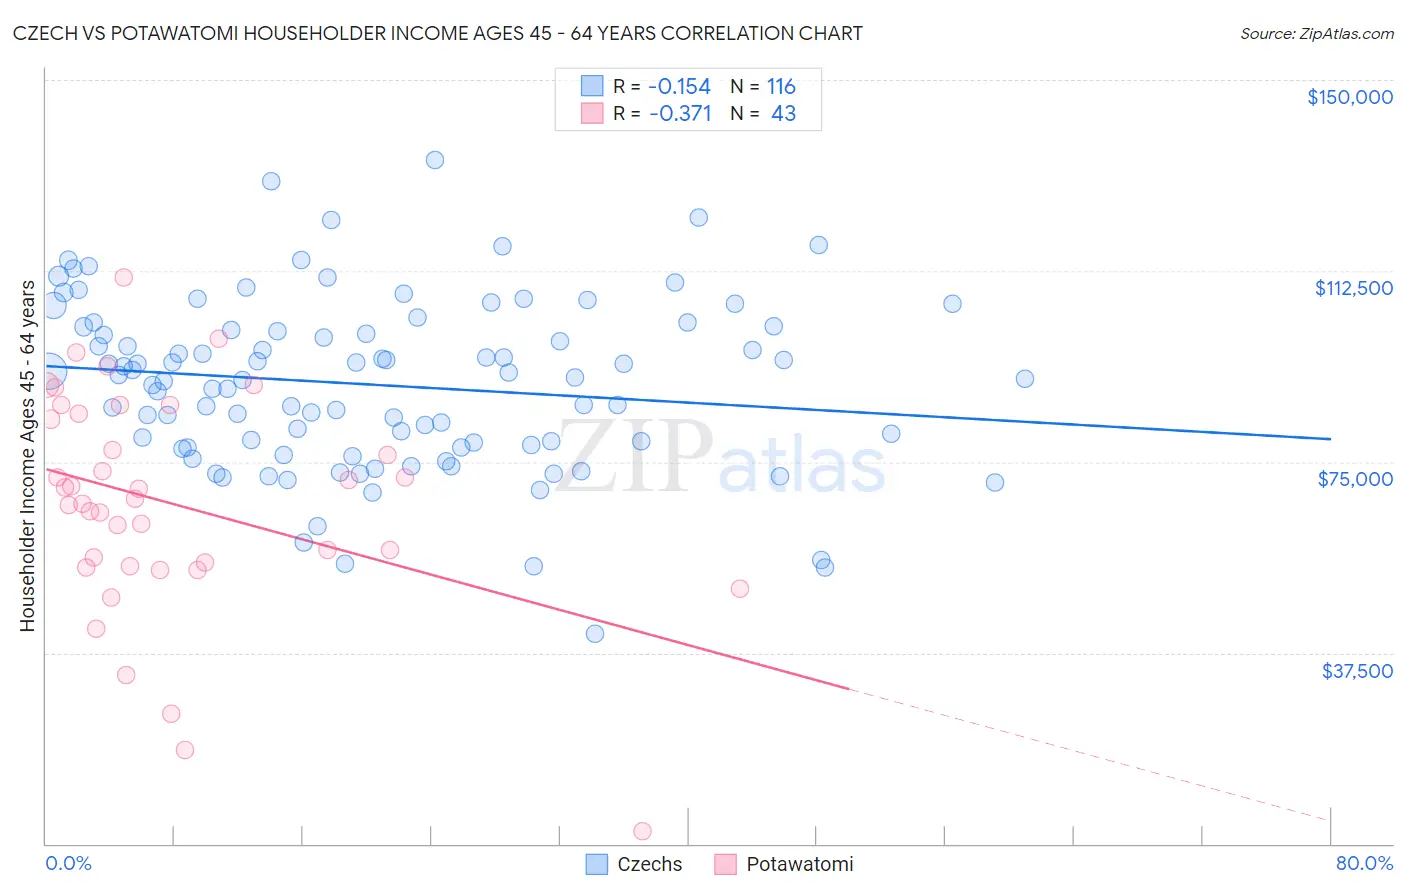 Czech vs Potawatomi Householder Income Ages 45 - 64 years